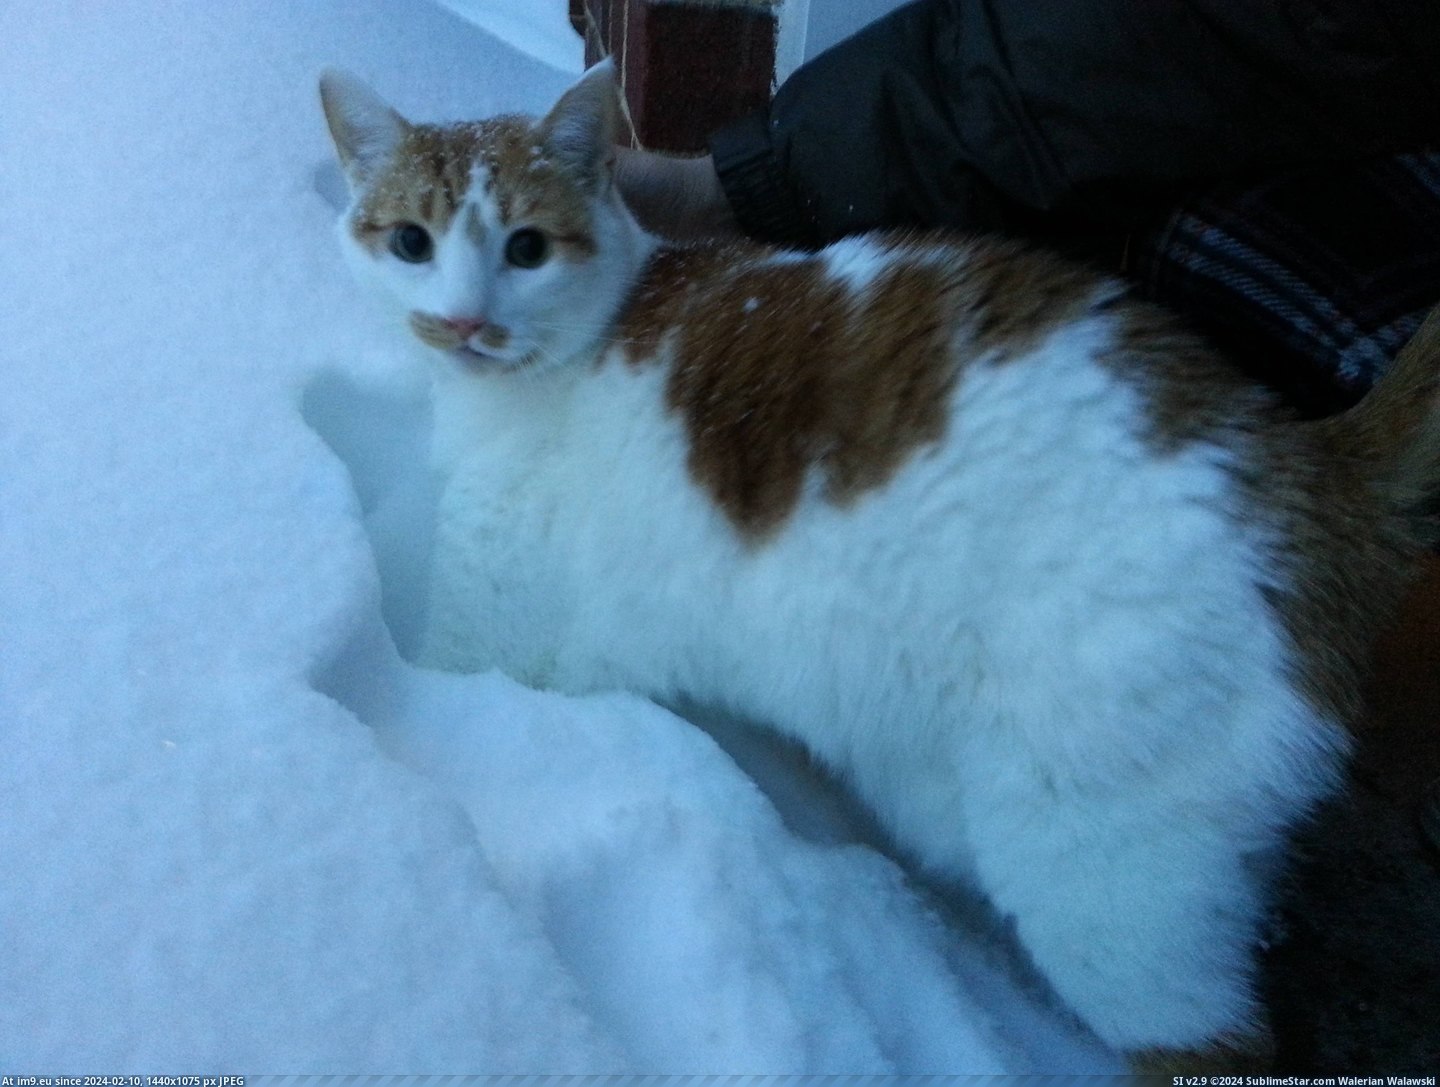 #Cats #Boy #Checking #Driveway #Mccow #Baby #Snow [Cats] Here's McCow, our 20lbs 'baby' boy, checking out the snow in our driveway! Pic. (Image of album My r/CATS favs))